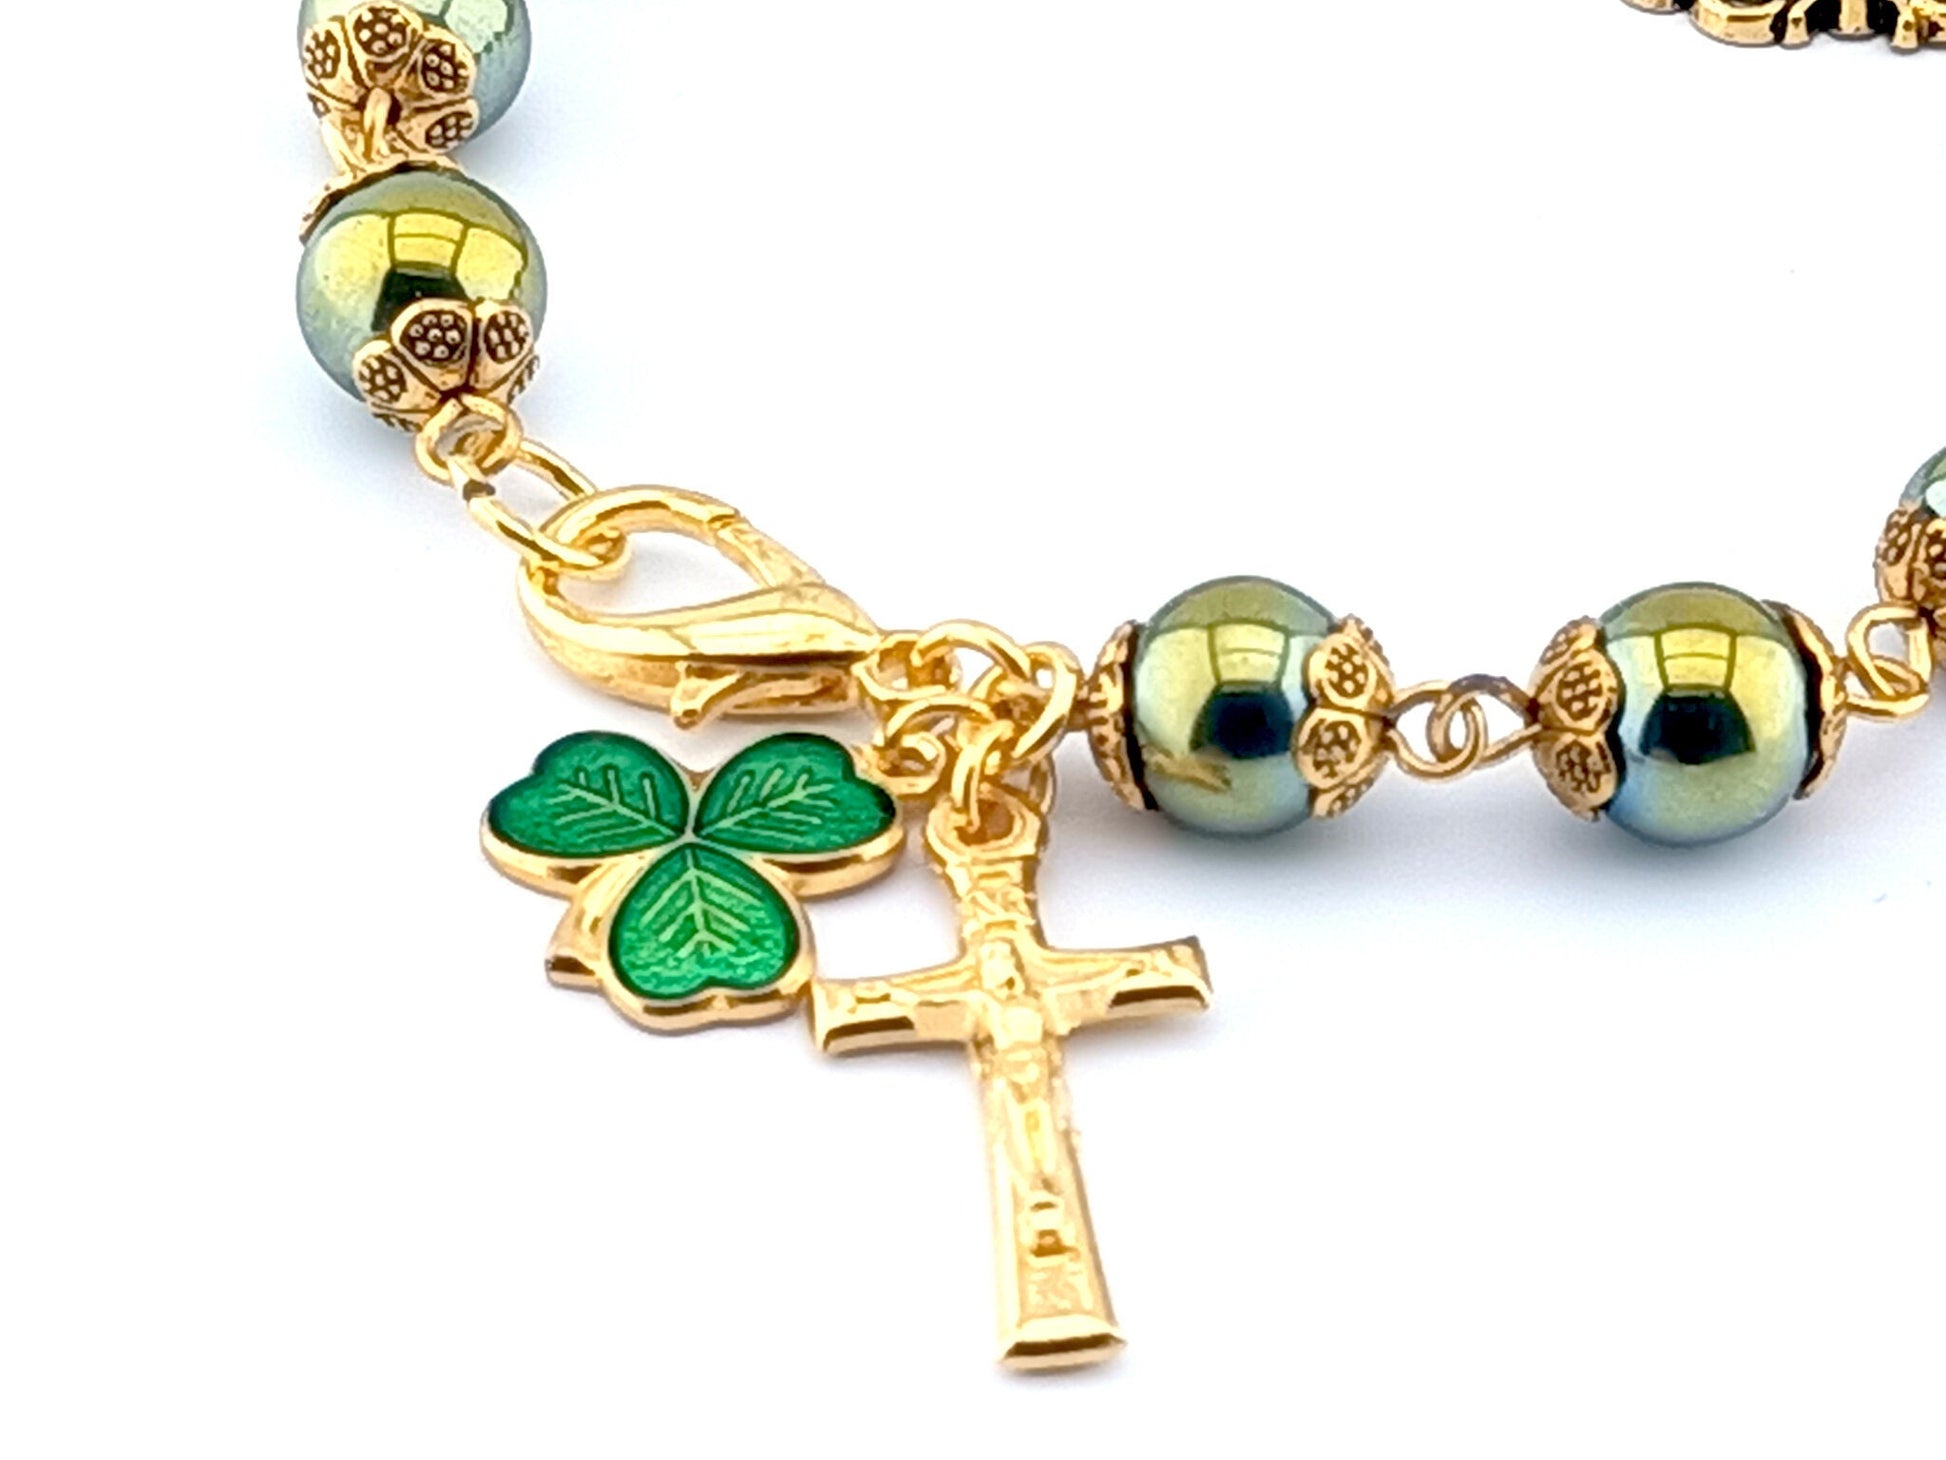 Our Lady of Sorrows unique rosary beads single decade bracelet with green hemitite beads, golden bead caps, crucifix, lobster clasp and picture medal.